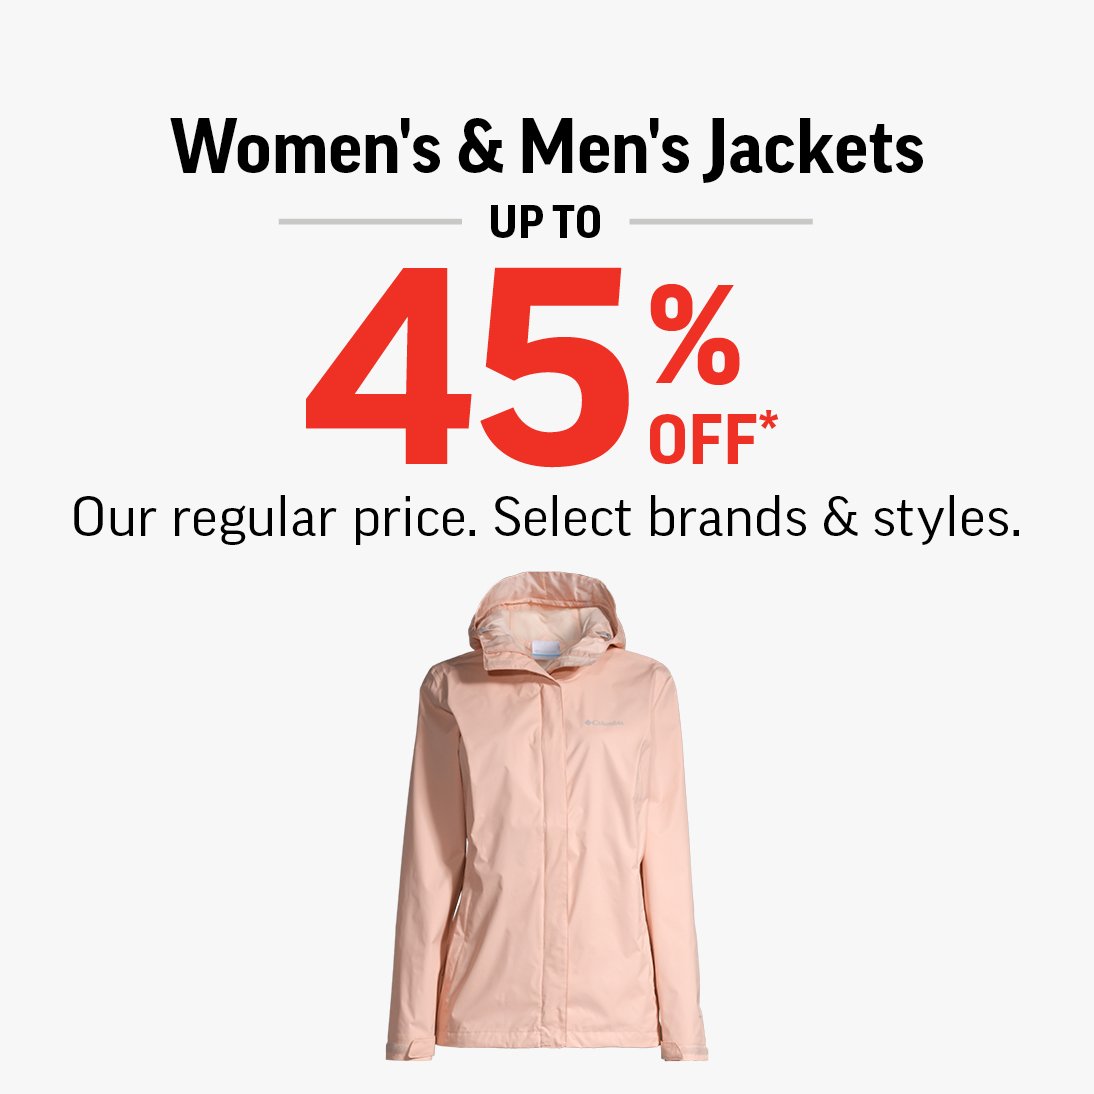 WOMEN'S & MEN'S JACKETS UP TO 45% OF